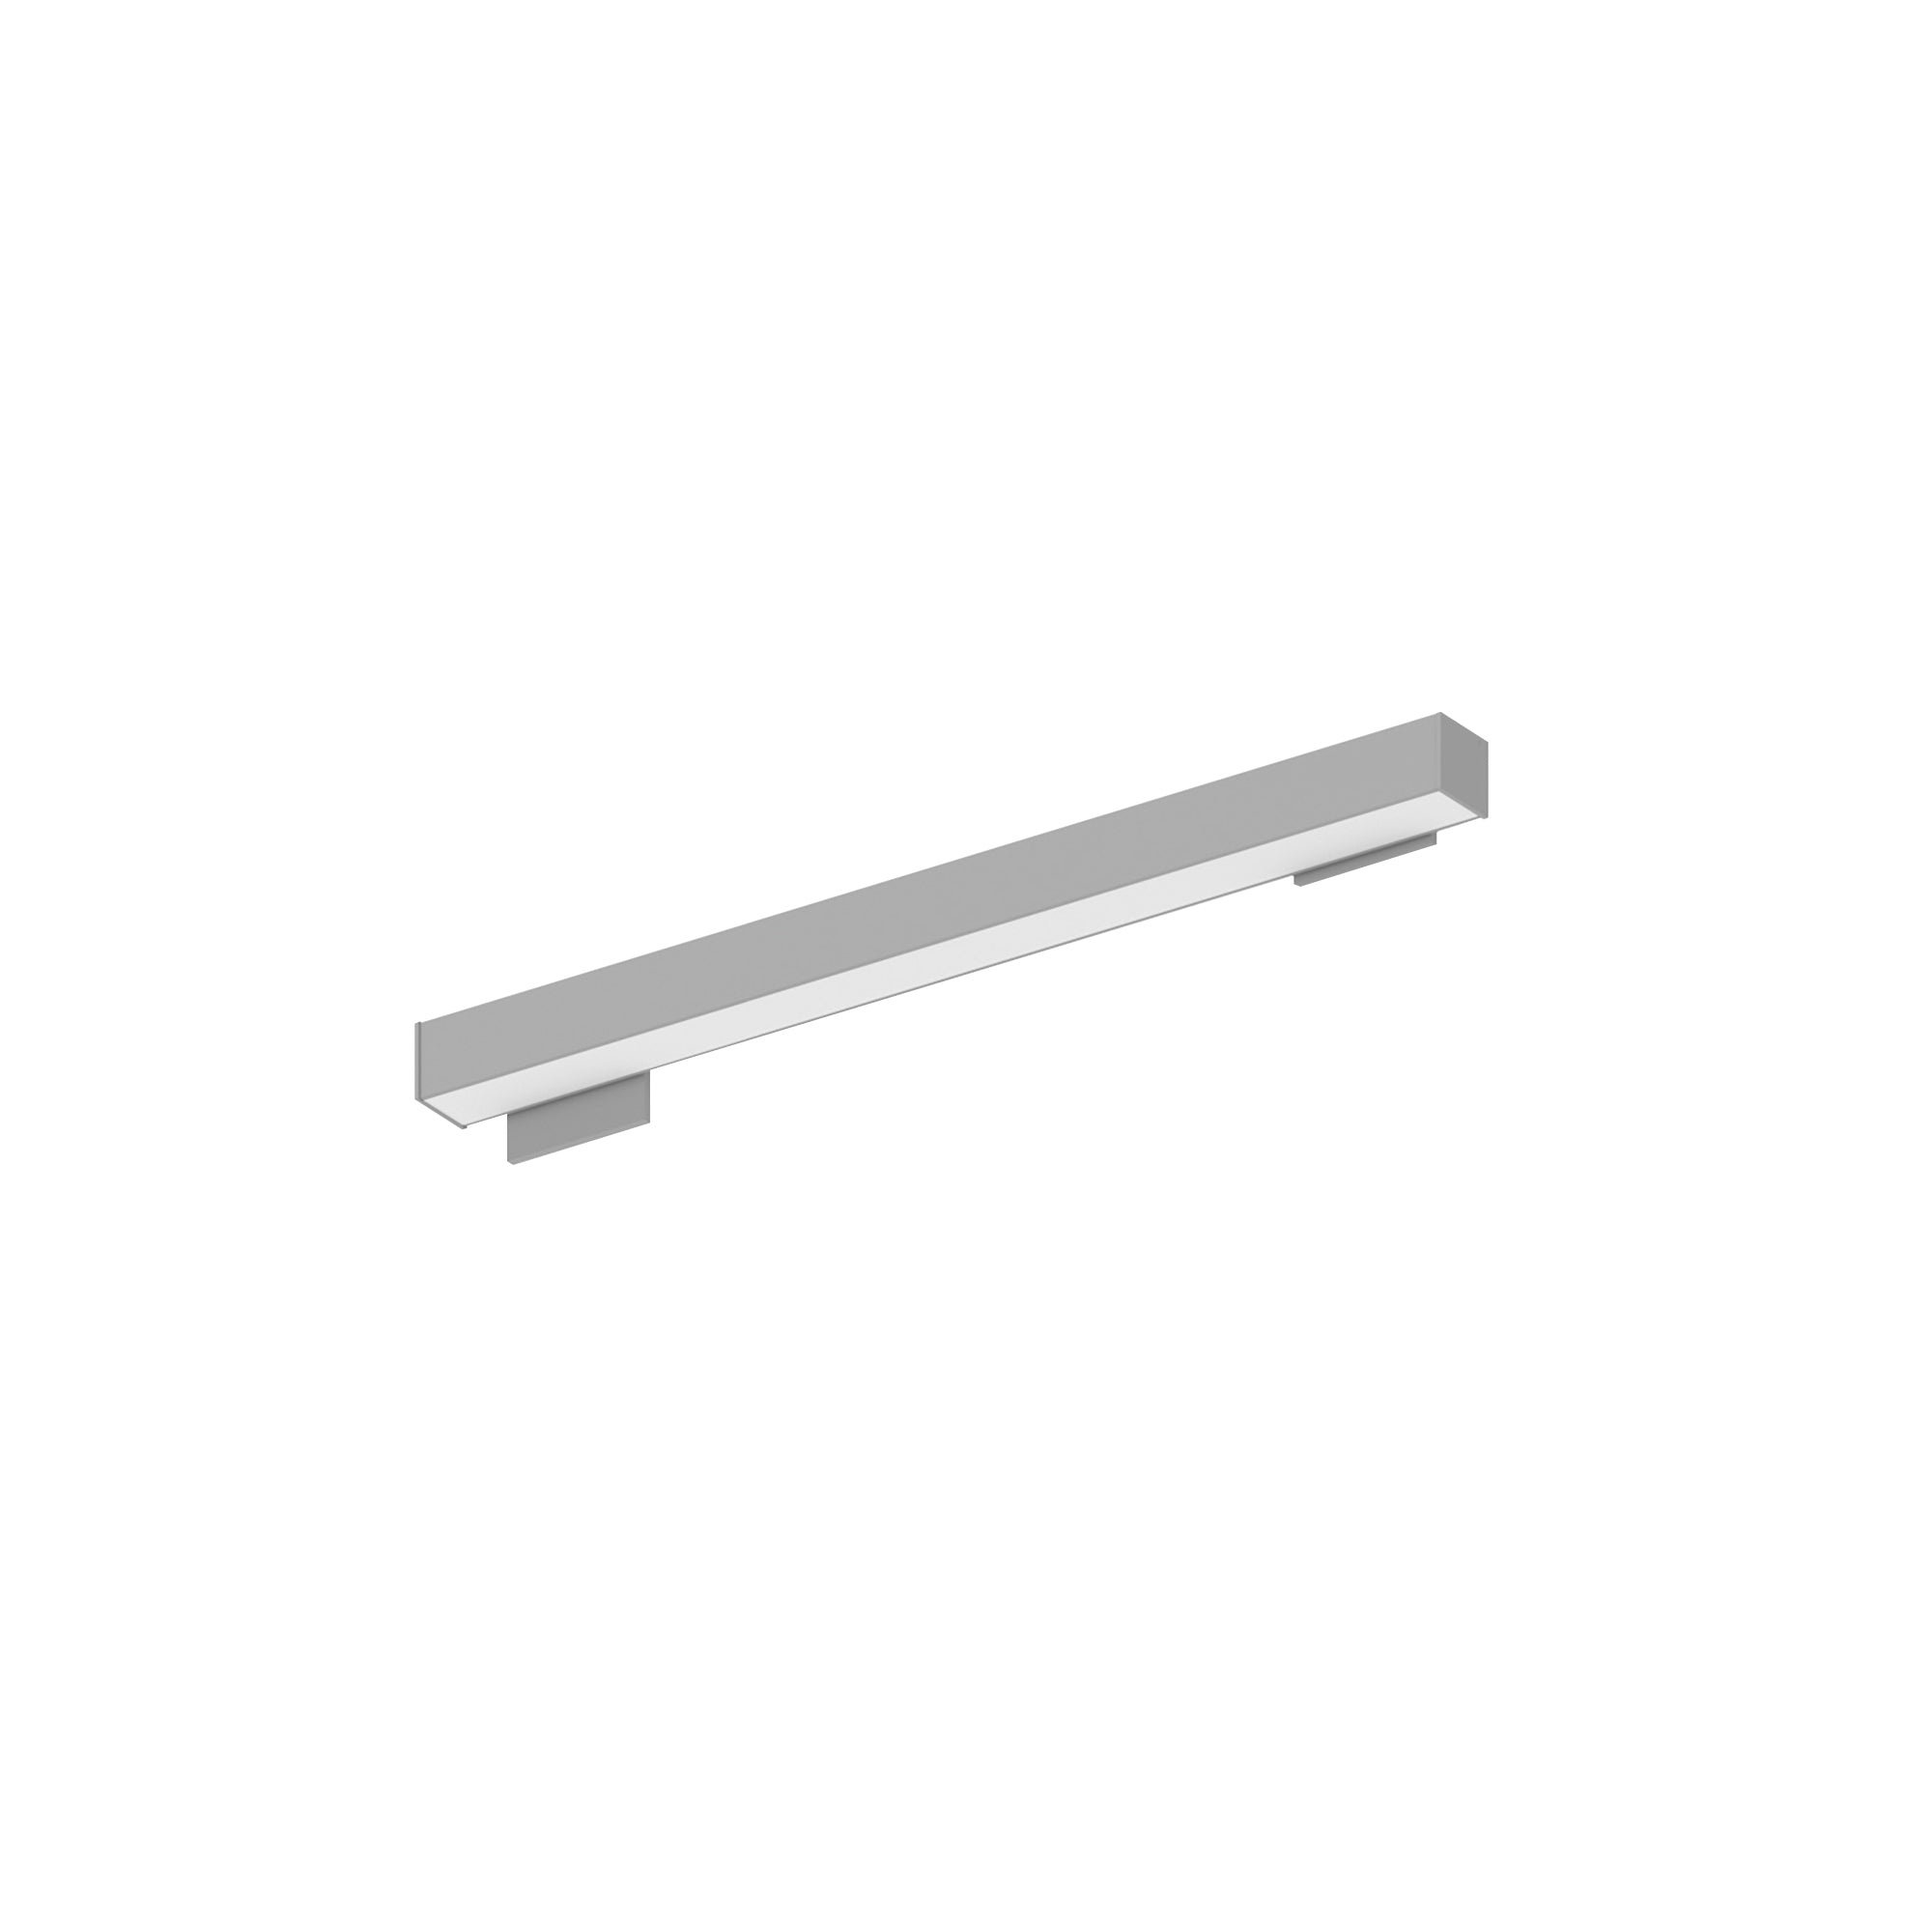 Nora Lighting NWLIN-21035A/L4-R2 - Linear - 2' L-Line LED Wall Mount Linear, 2100lm / 3500K, 4 Inchx4 Inch Left Plate & 2 Inchx4 Inch Right Plate, Aluminum Finish